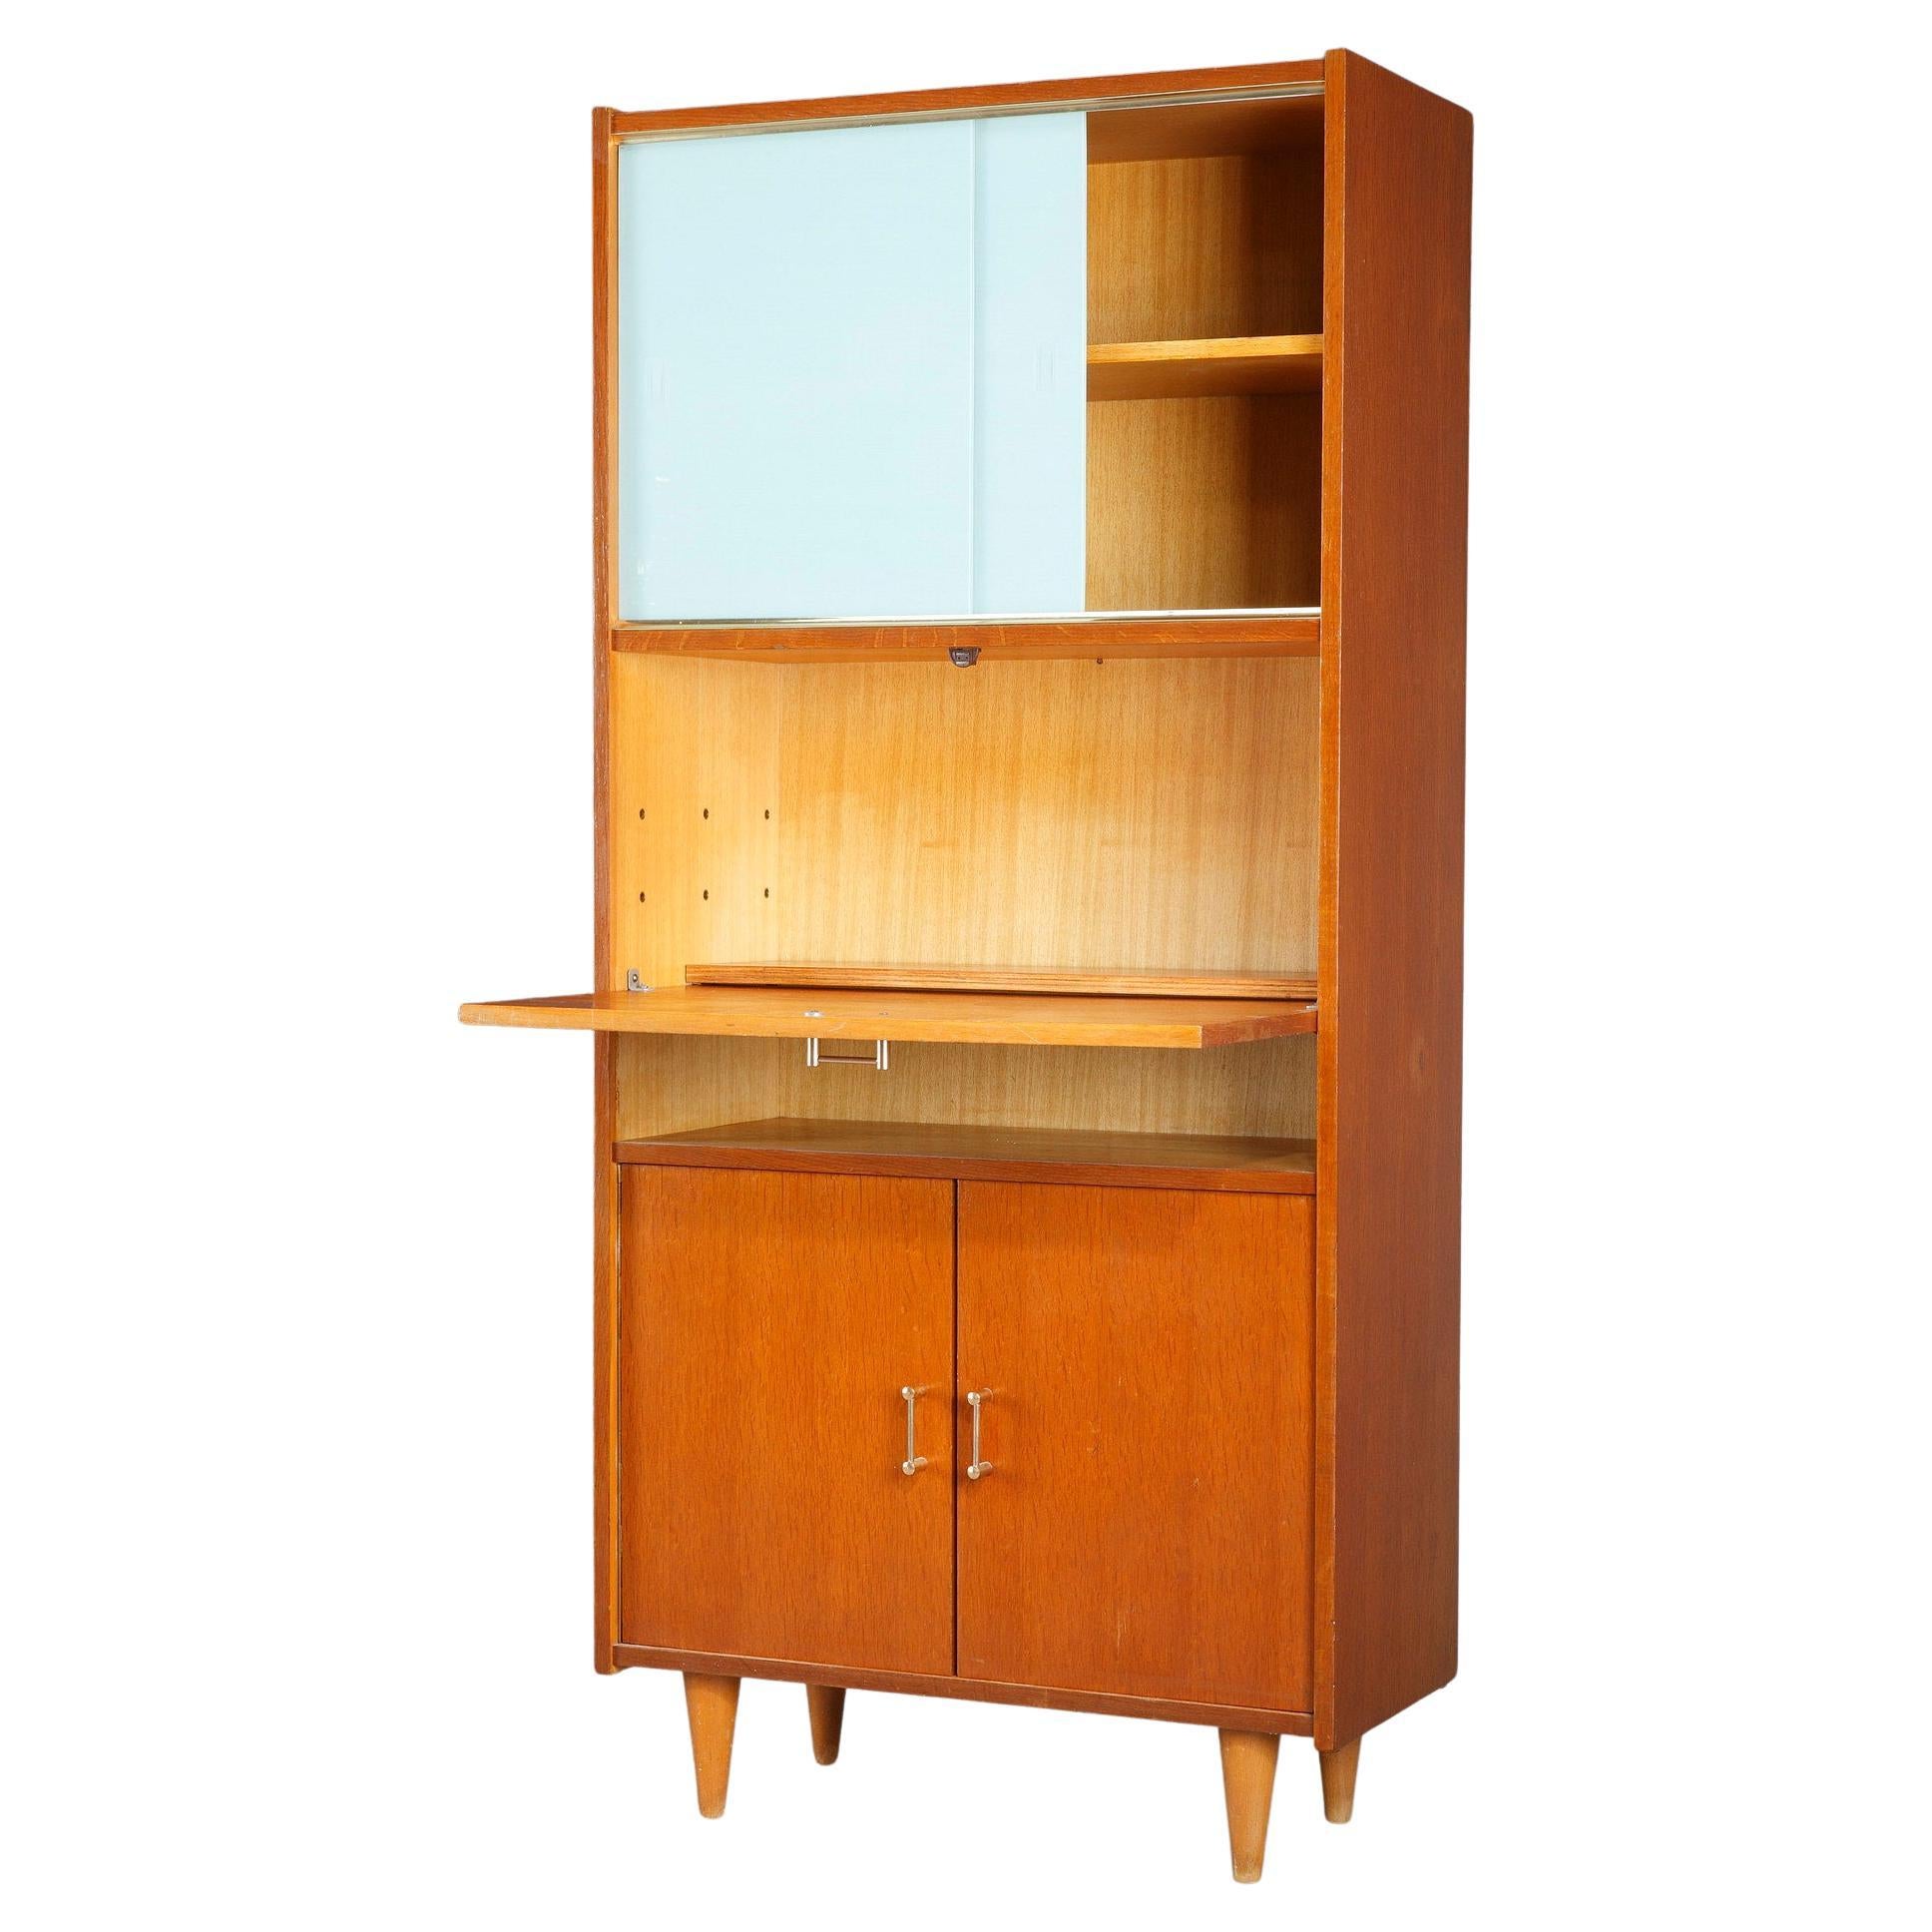 Mid-Century Modern Desk from the 1960s